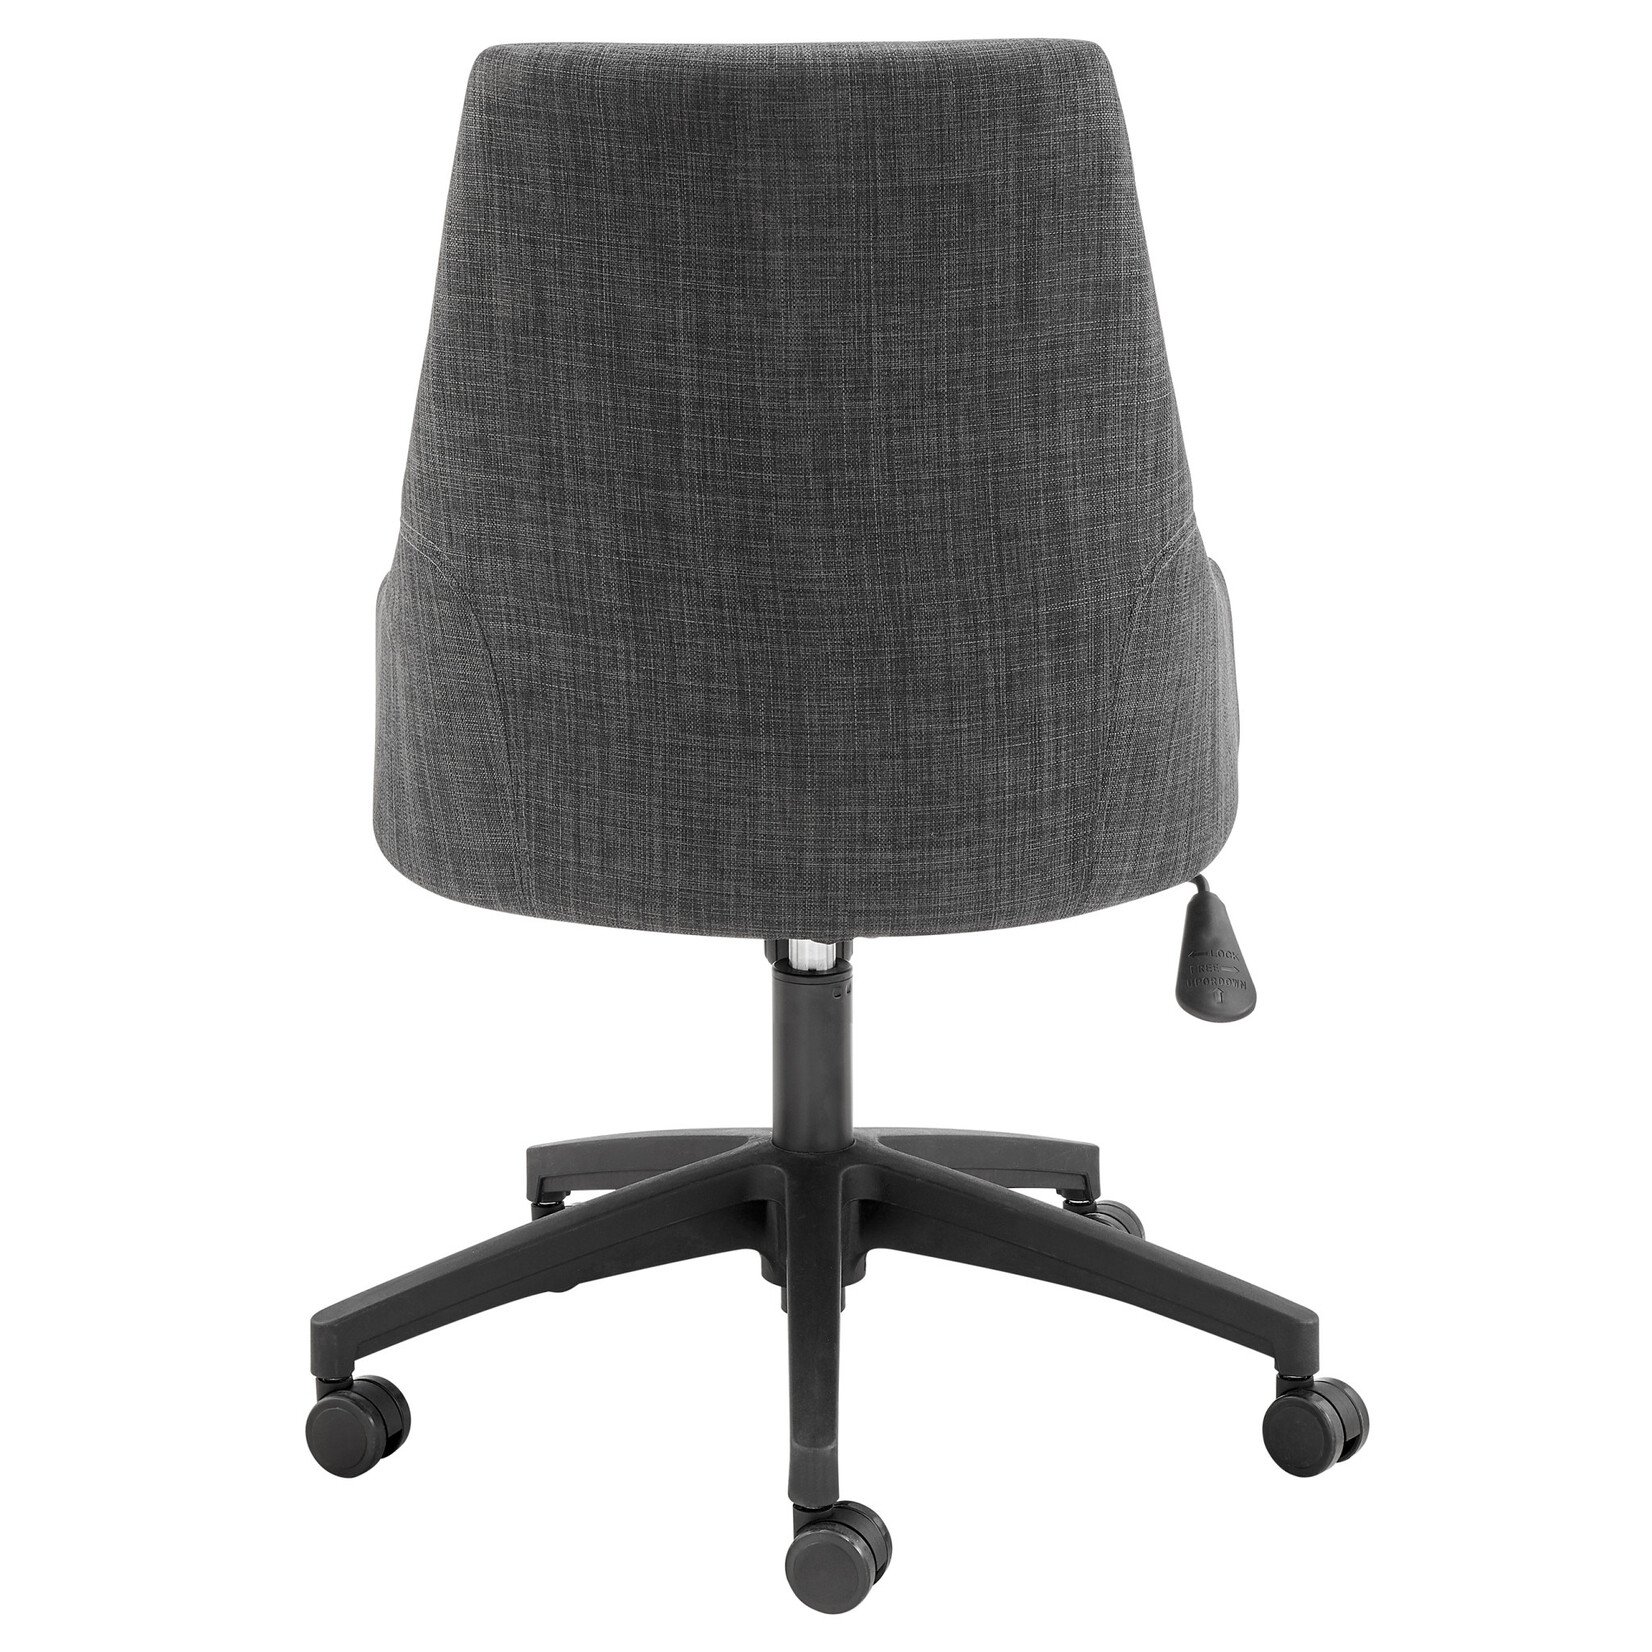 EuroStyle Signa Office Chair Charcoal